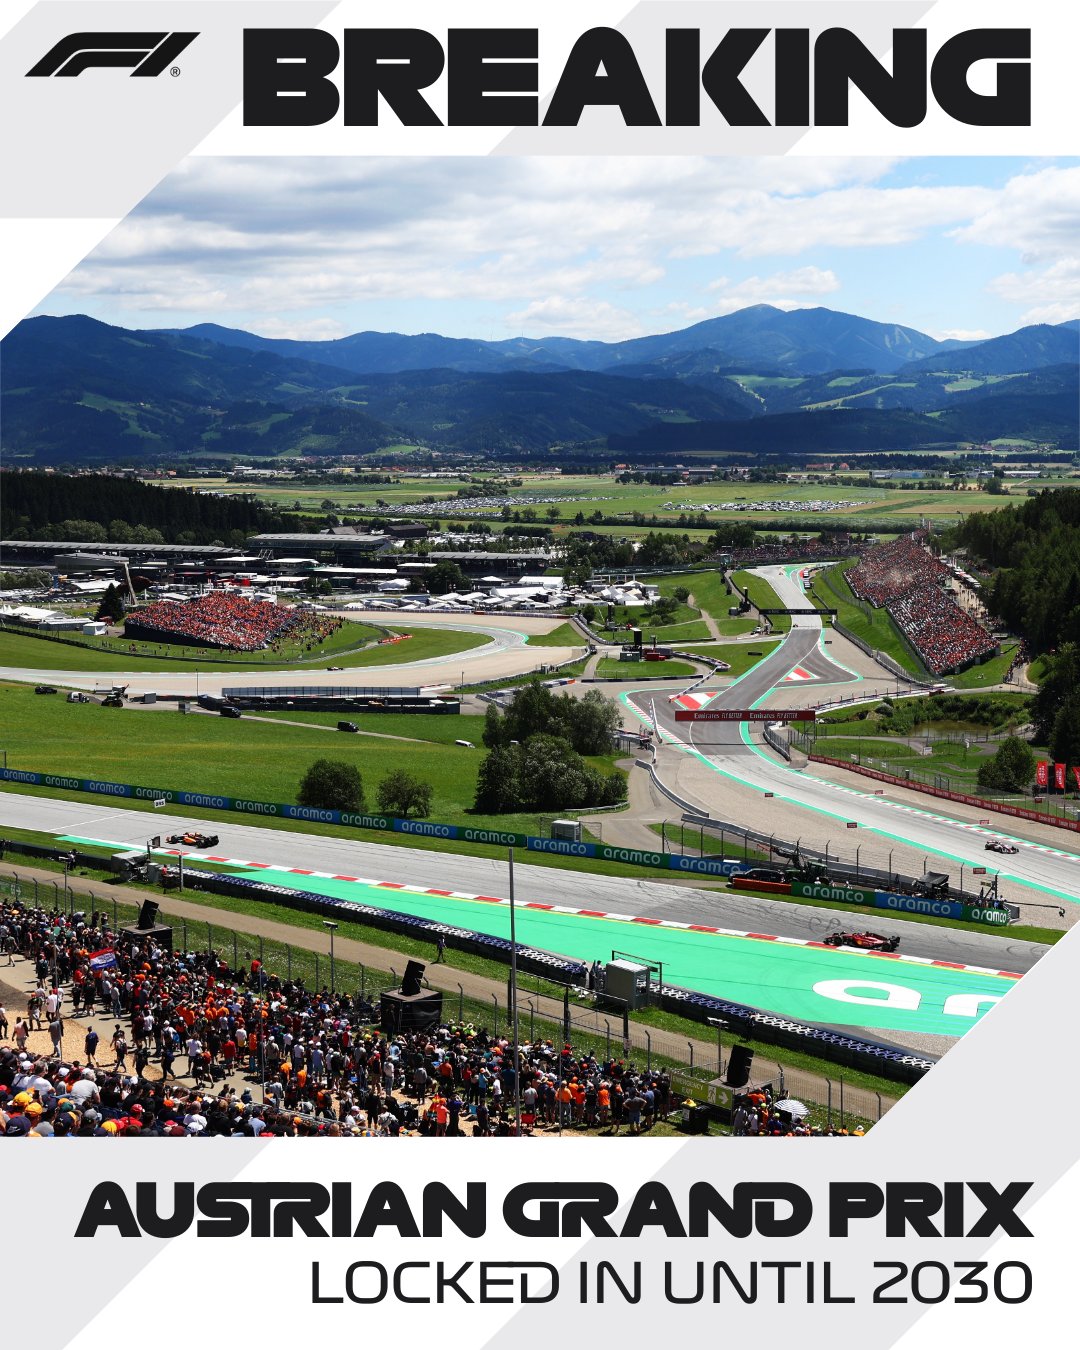 Breaking news graphic announcing that the Austrian Grand Prix will remain on the Formula 1 calendar until at least 2030 